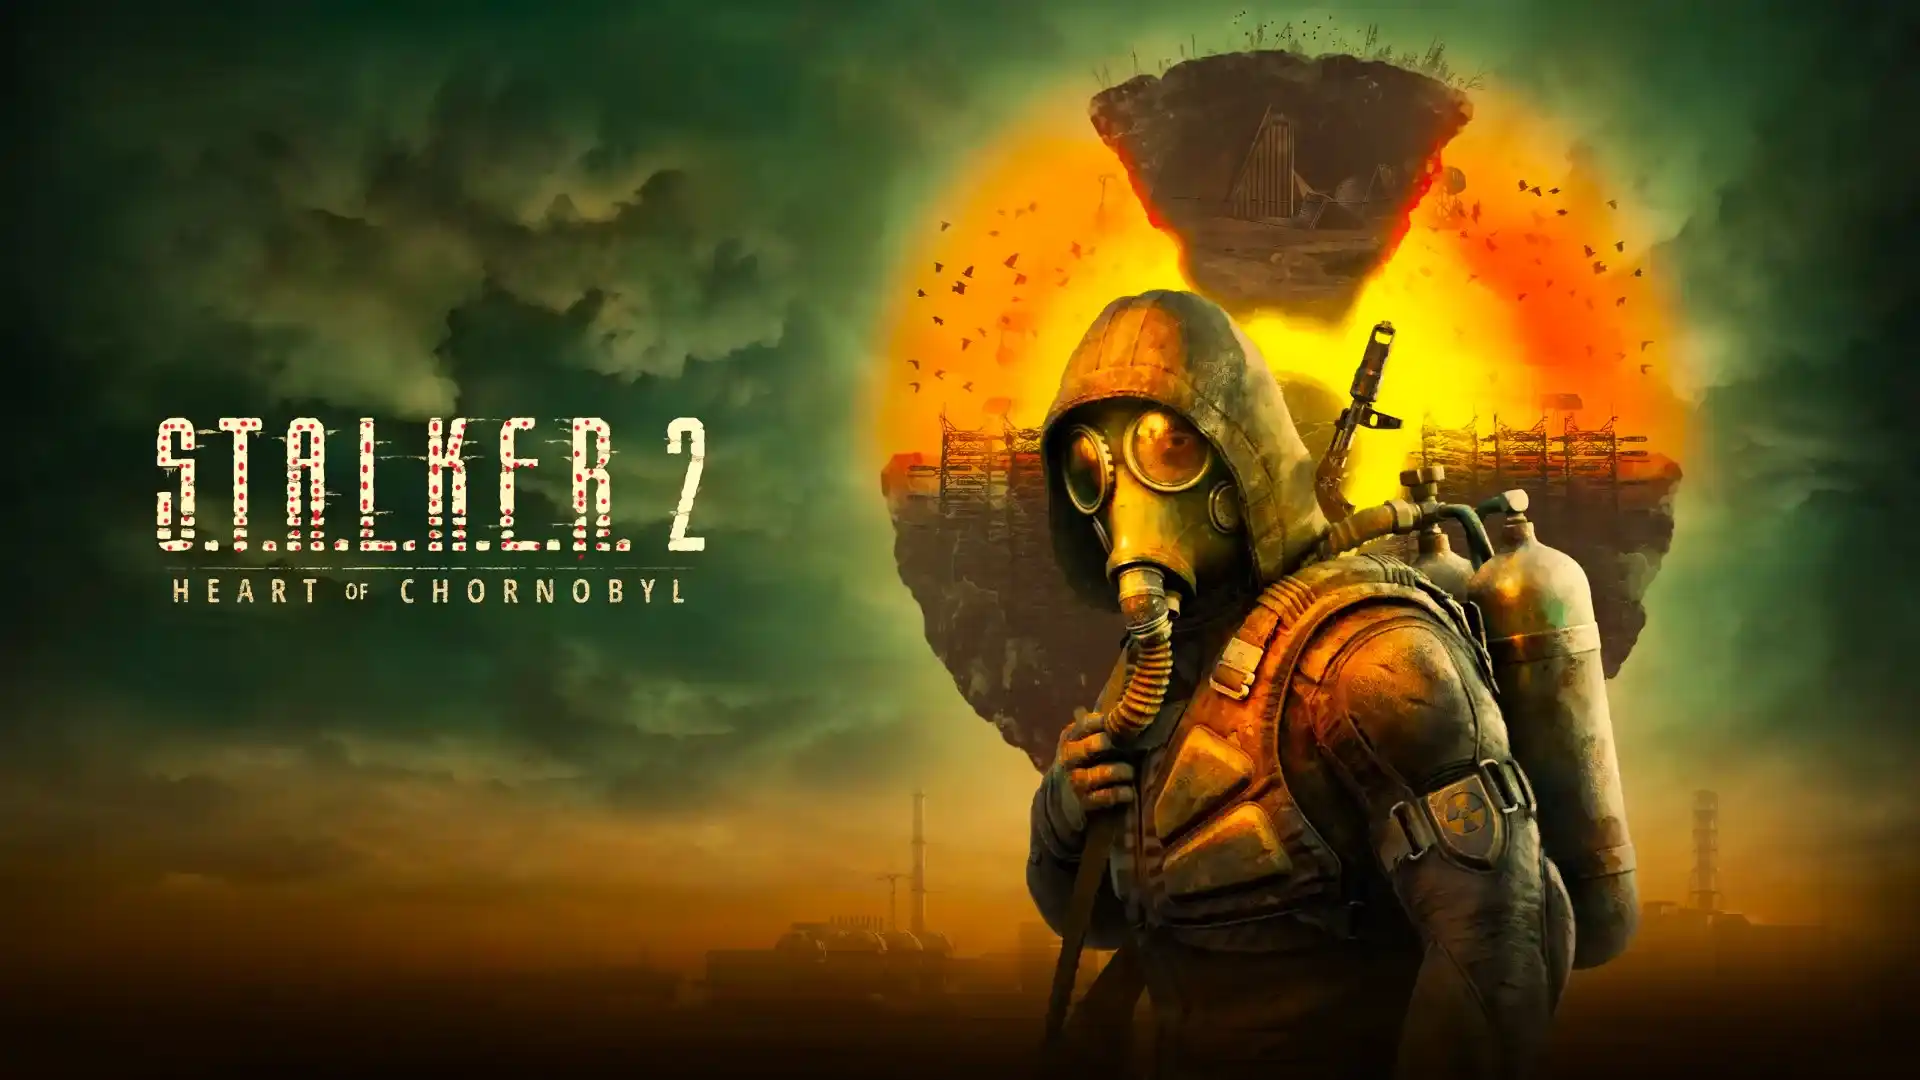 S.T.A.L.K.E.R. 2: Heart of Chornobyl Requirements